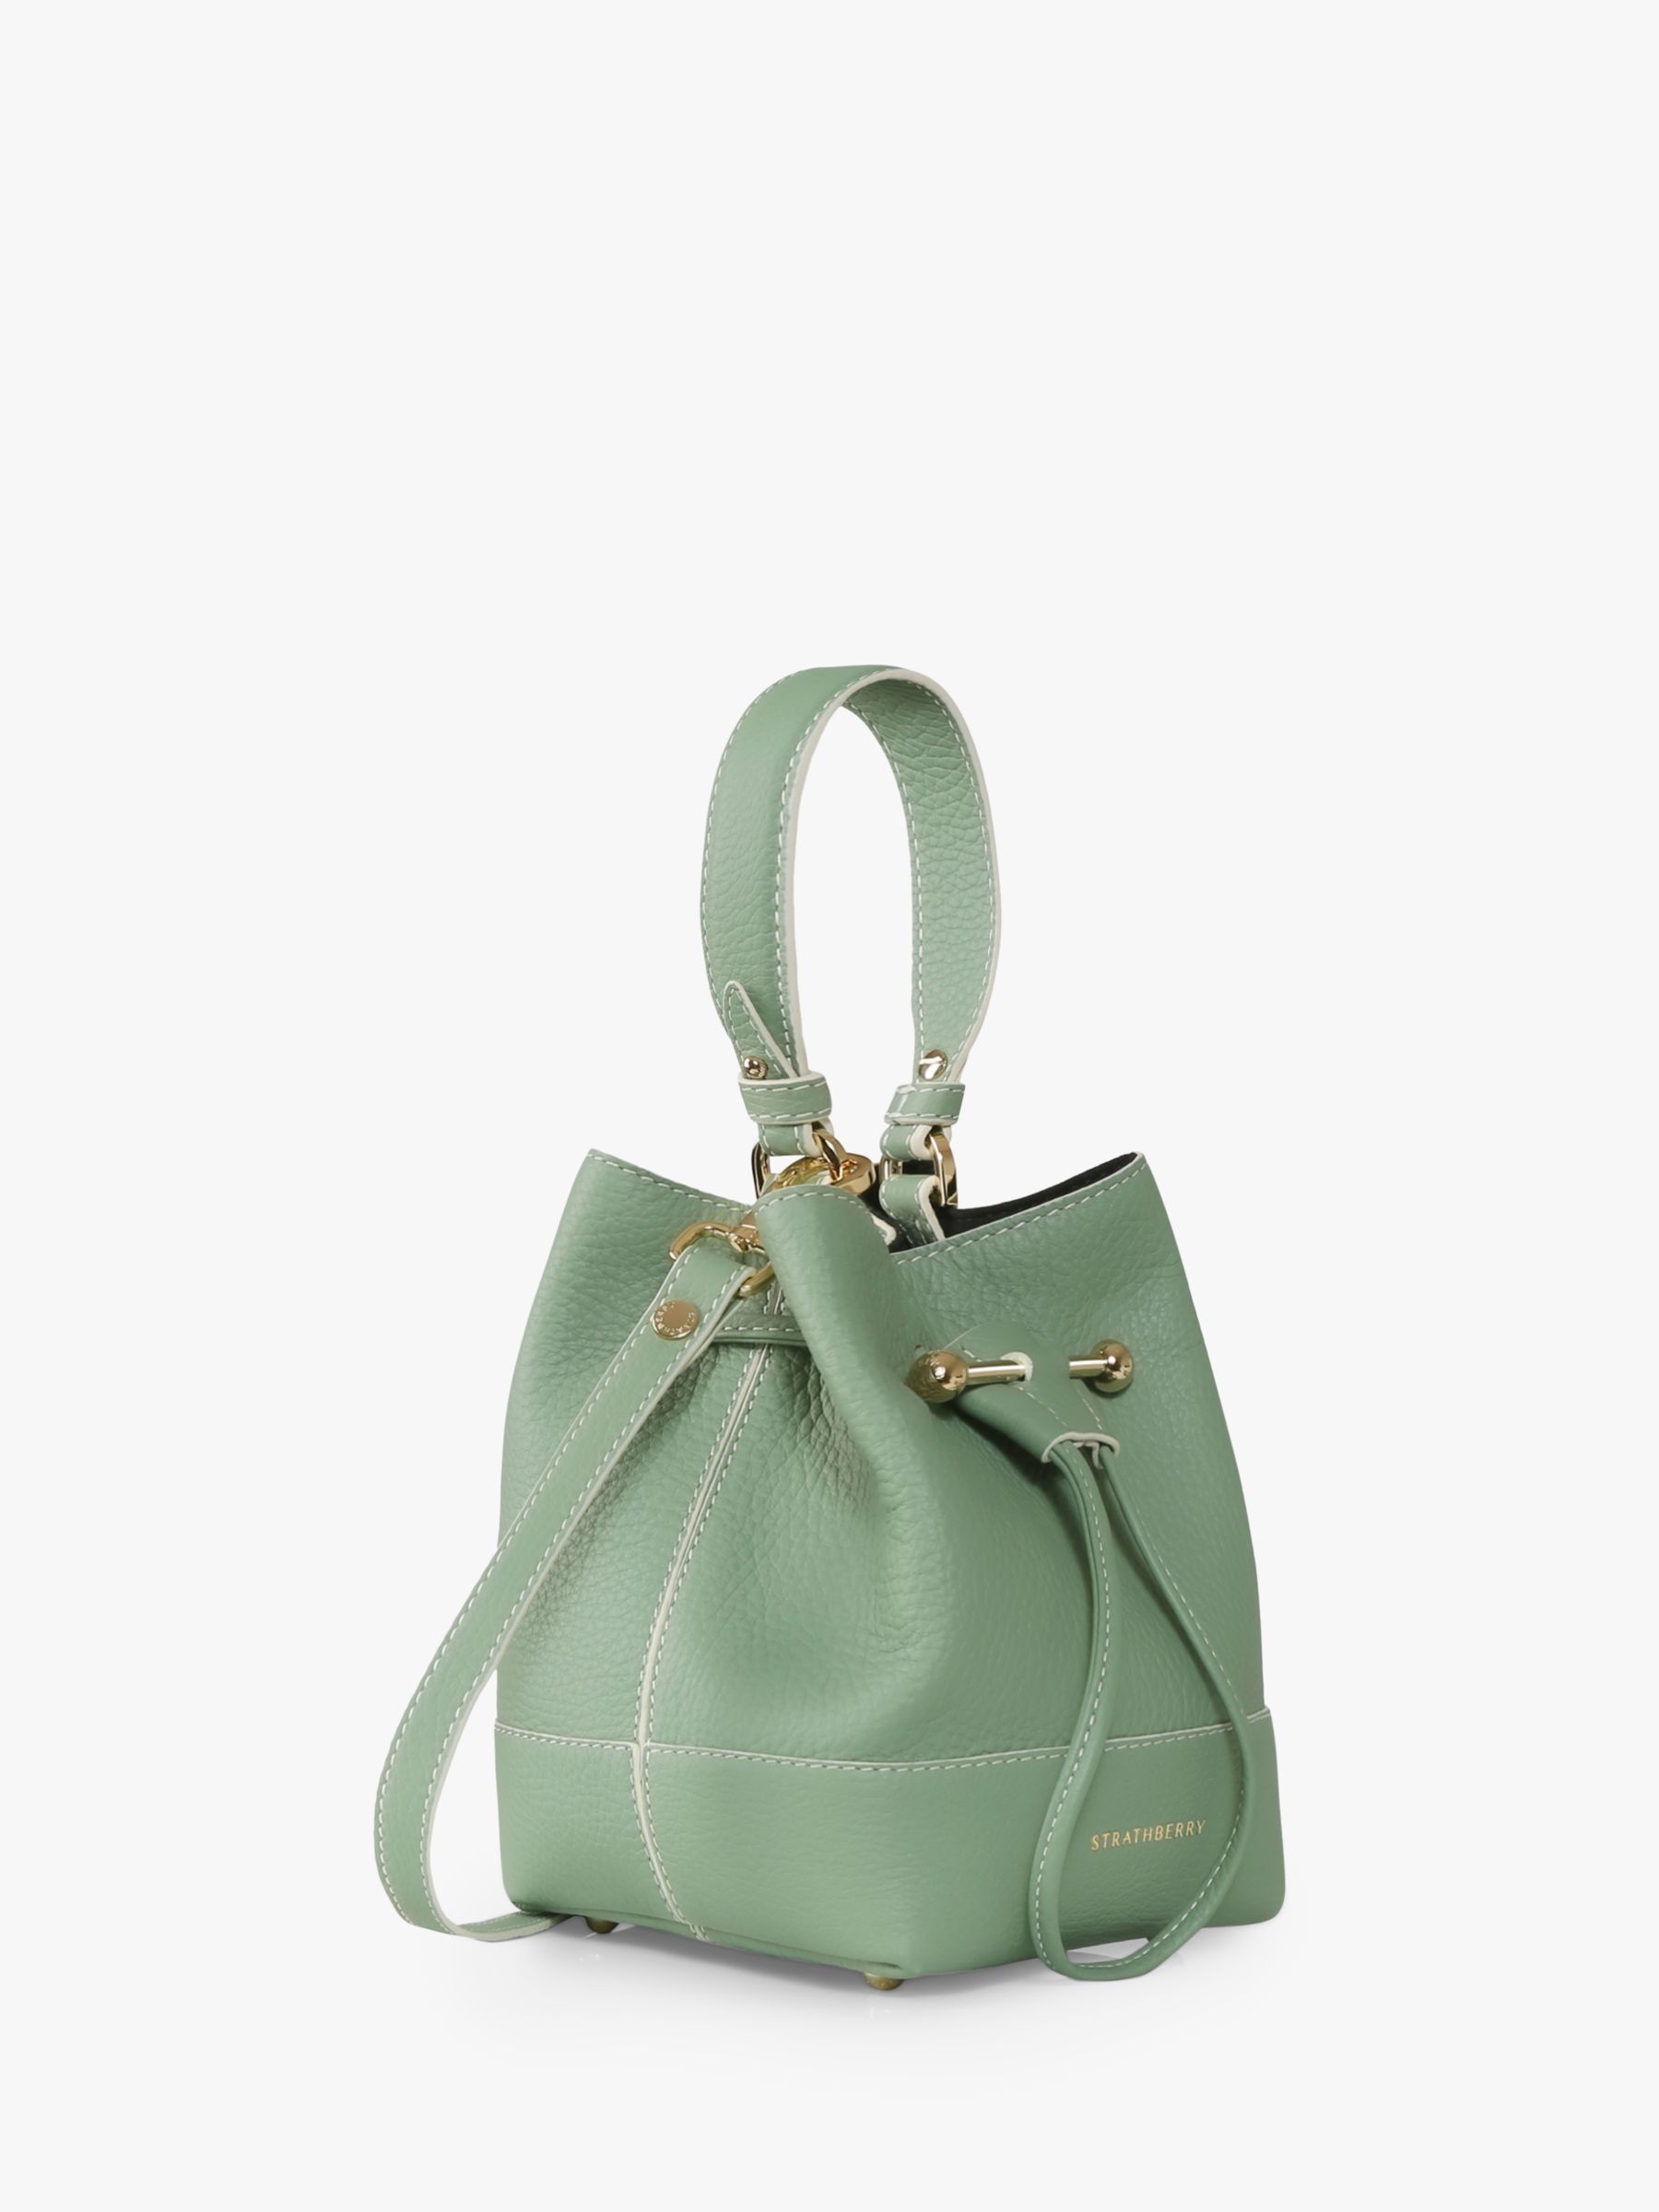 Strathberry Lana Osette Leather Bucket Bag, Sage at John Lewis & Partners